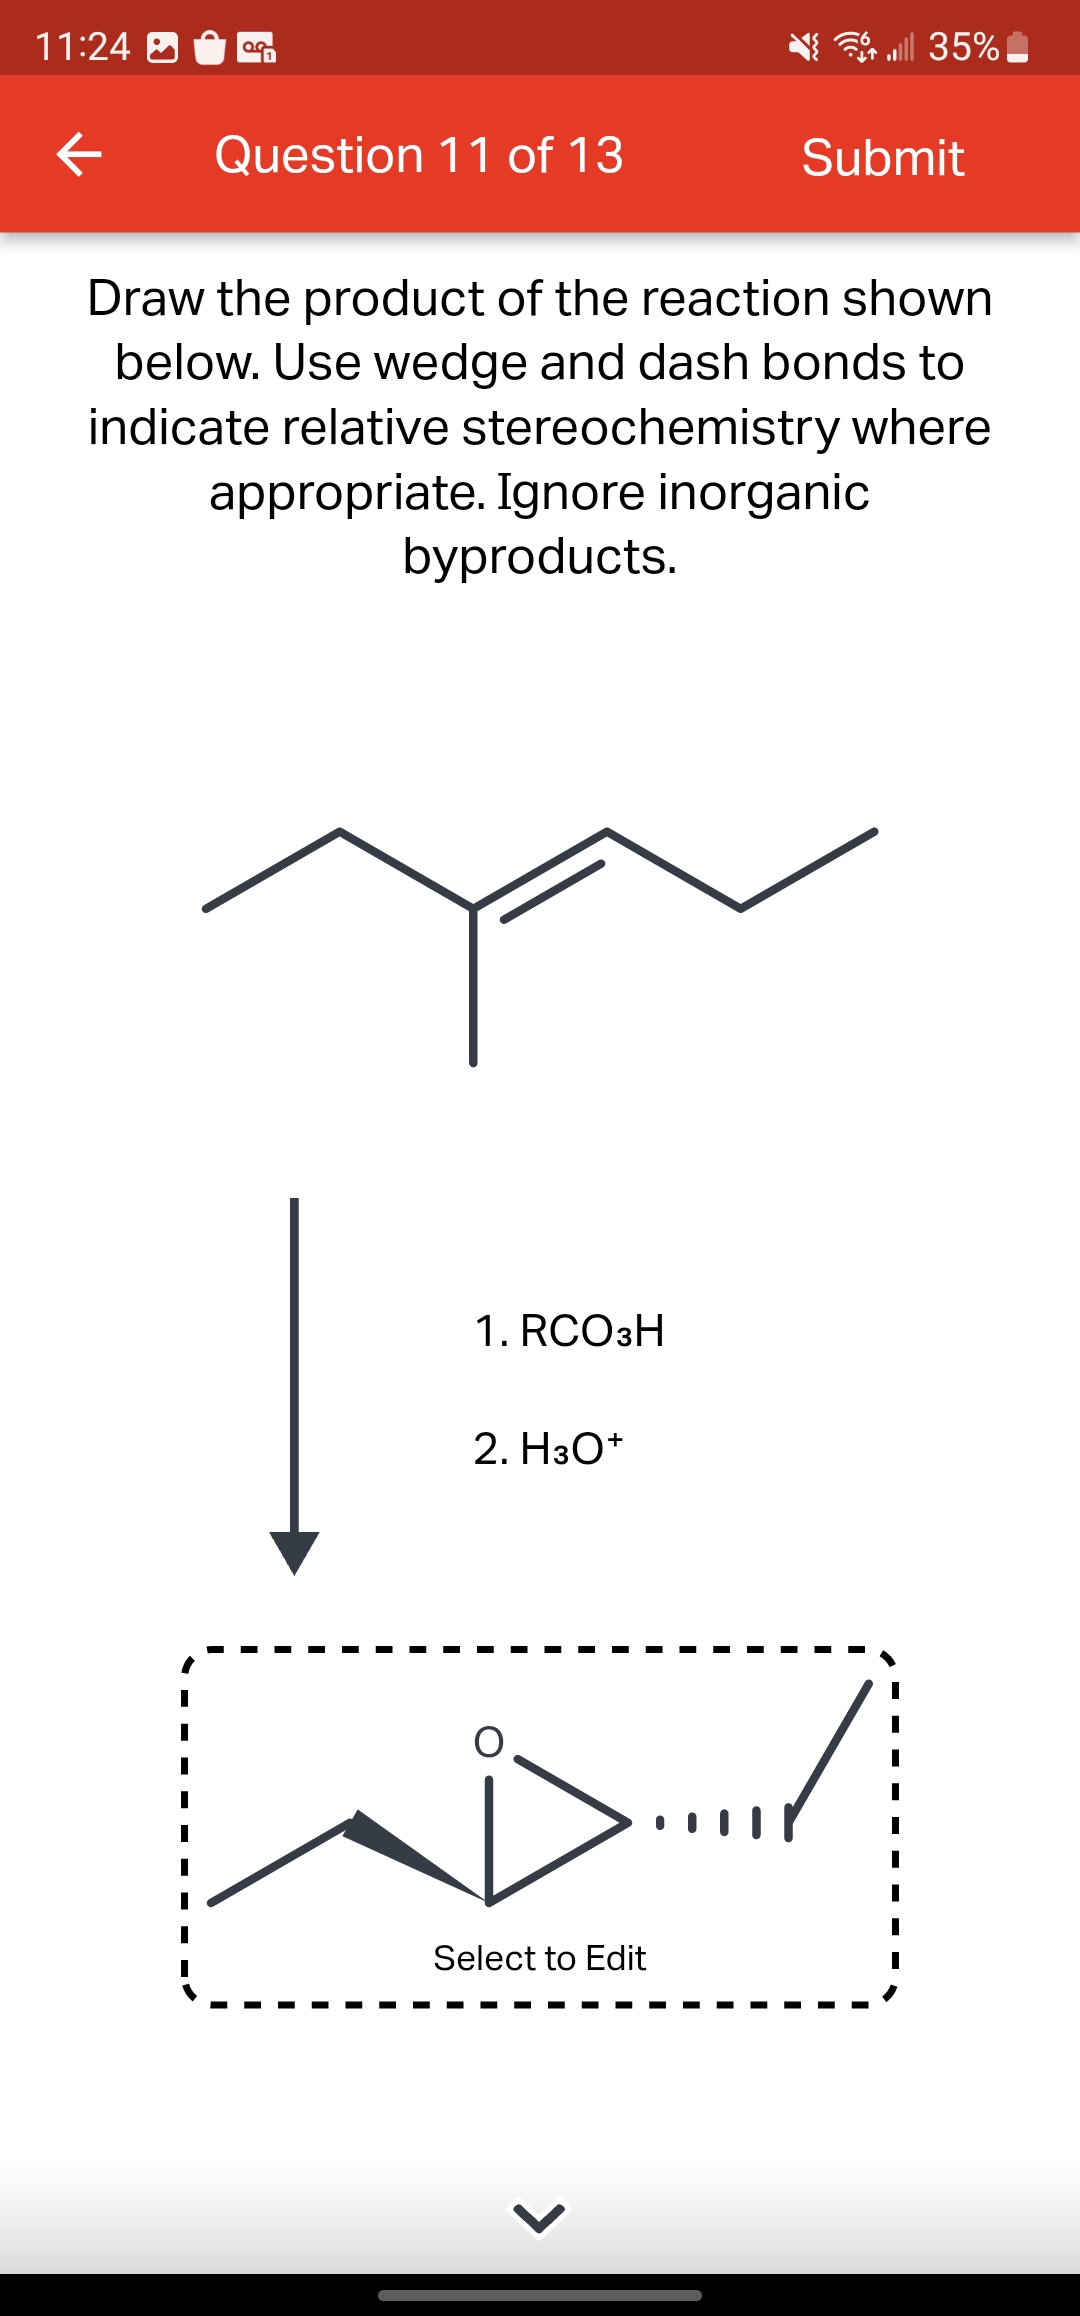 11:24
←
0.0
Question 11 of 13
1. RCO3H
Draw the product of the reaction shown
below. Use wedge and dash bonds to
indicate relative stereochemistry where
appropriate. Ignore inorganic
byproducts.
2. H3O+
all 35%
D...
Select to Edit
Submit